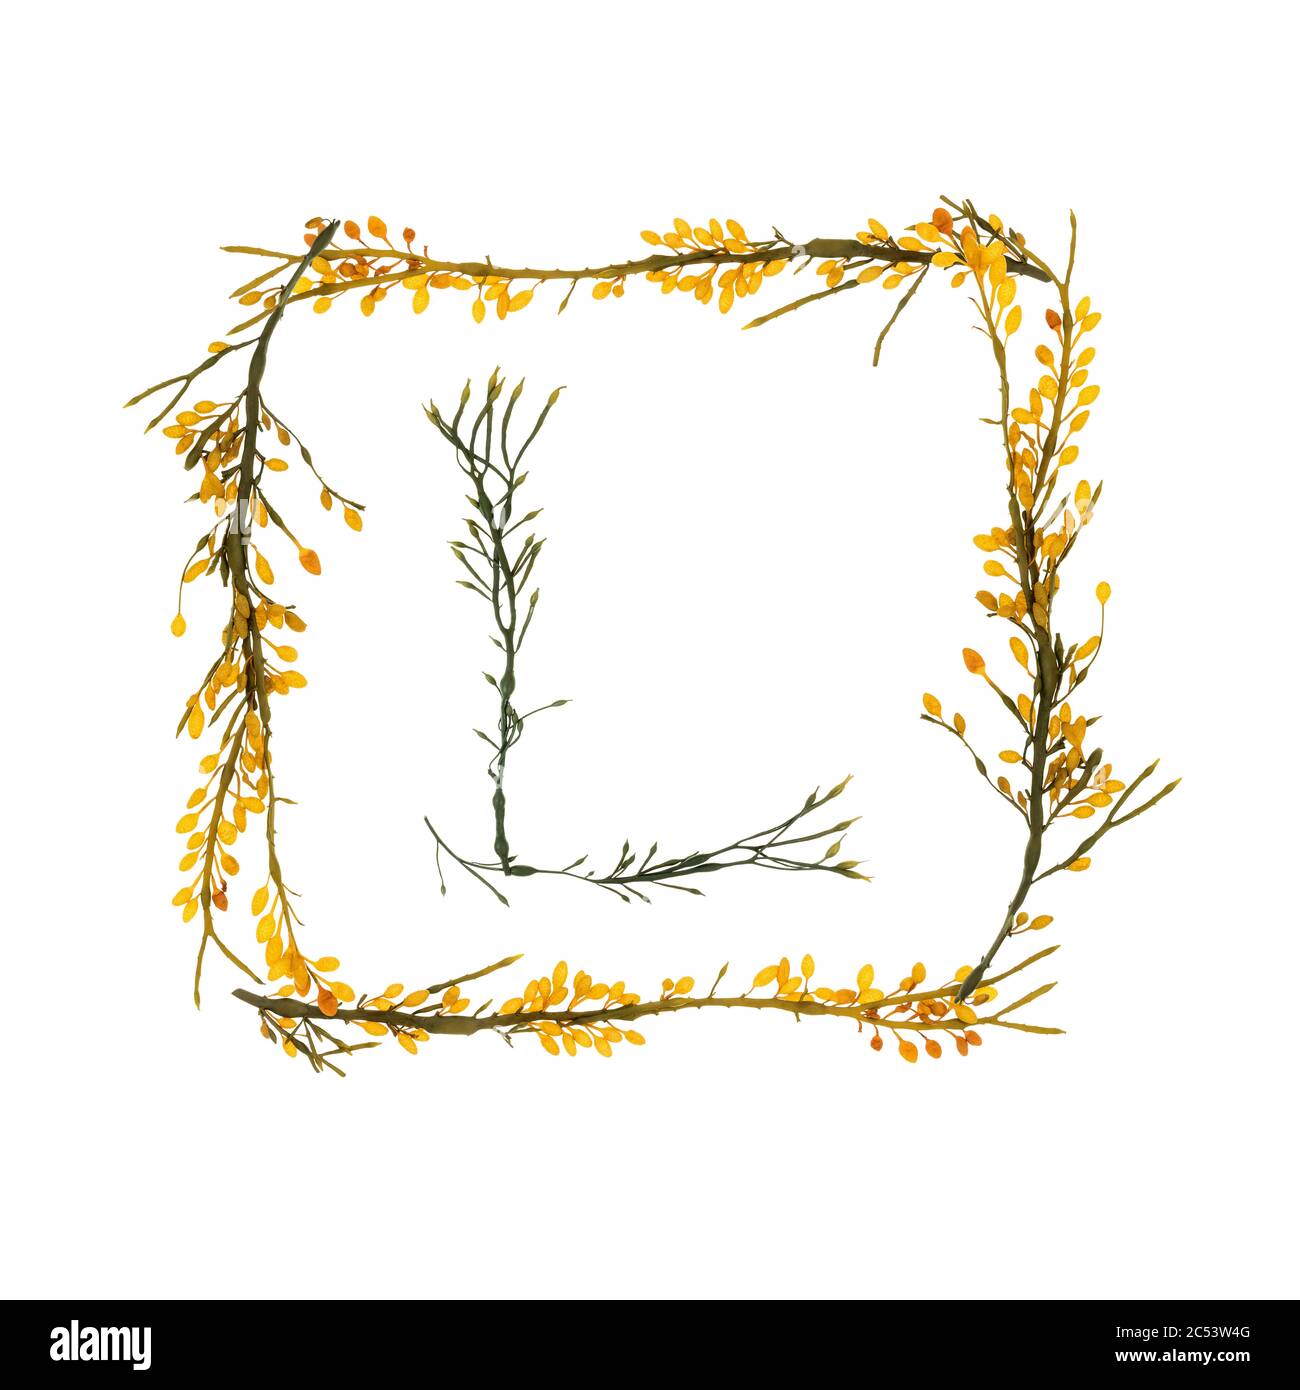 Letters and borders formed with Rockweed (Ascophyllum nodosum) gathered on the shore of Mount Desert Island, Maine. The yellow pods are conceptacles. Stock Photo